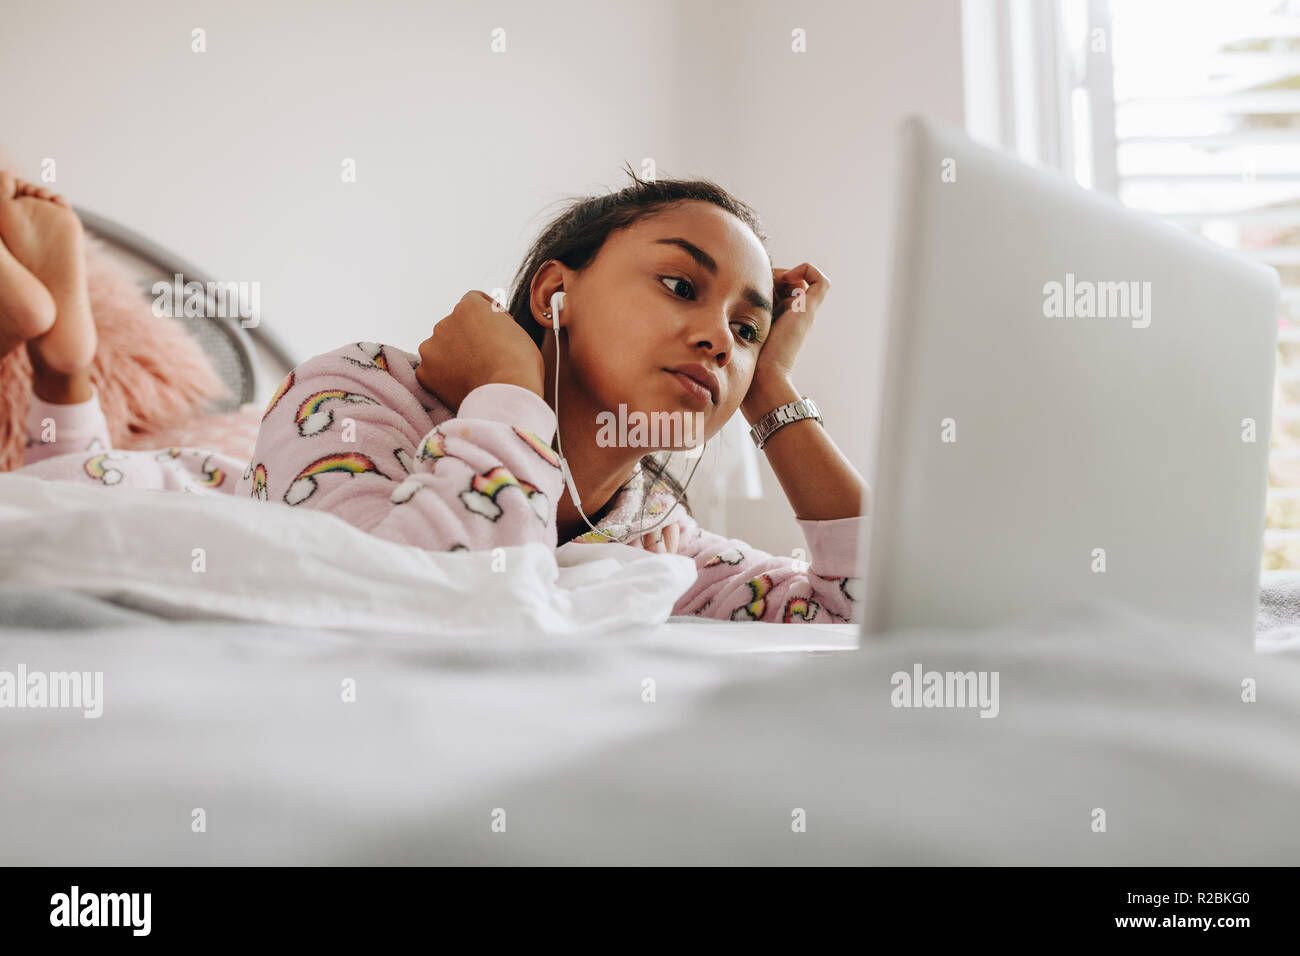 Young girl in bed watching a movie on laptop. Girl using laptop lying on bed while listening to music using earphones. Stock Photo